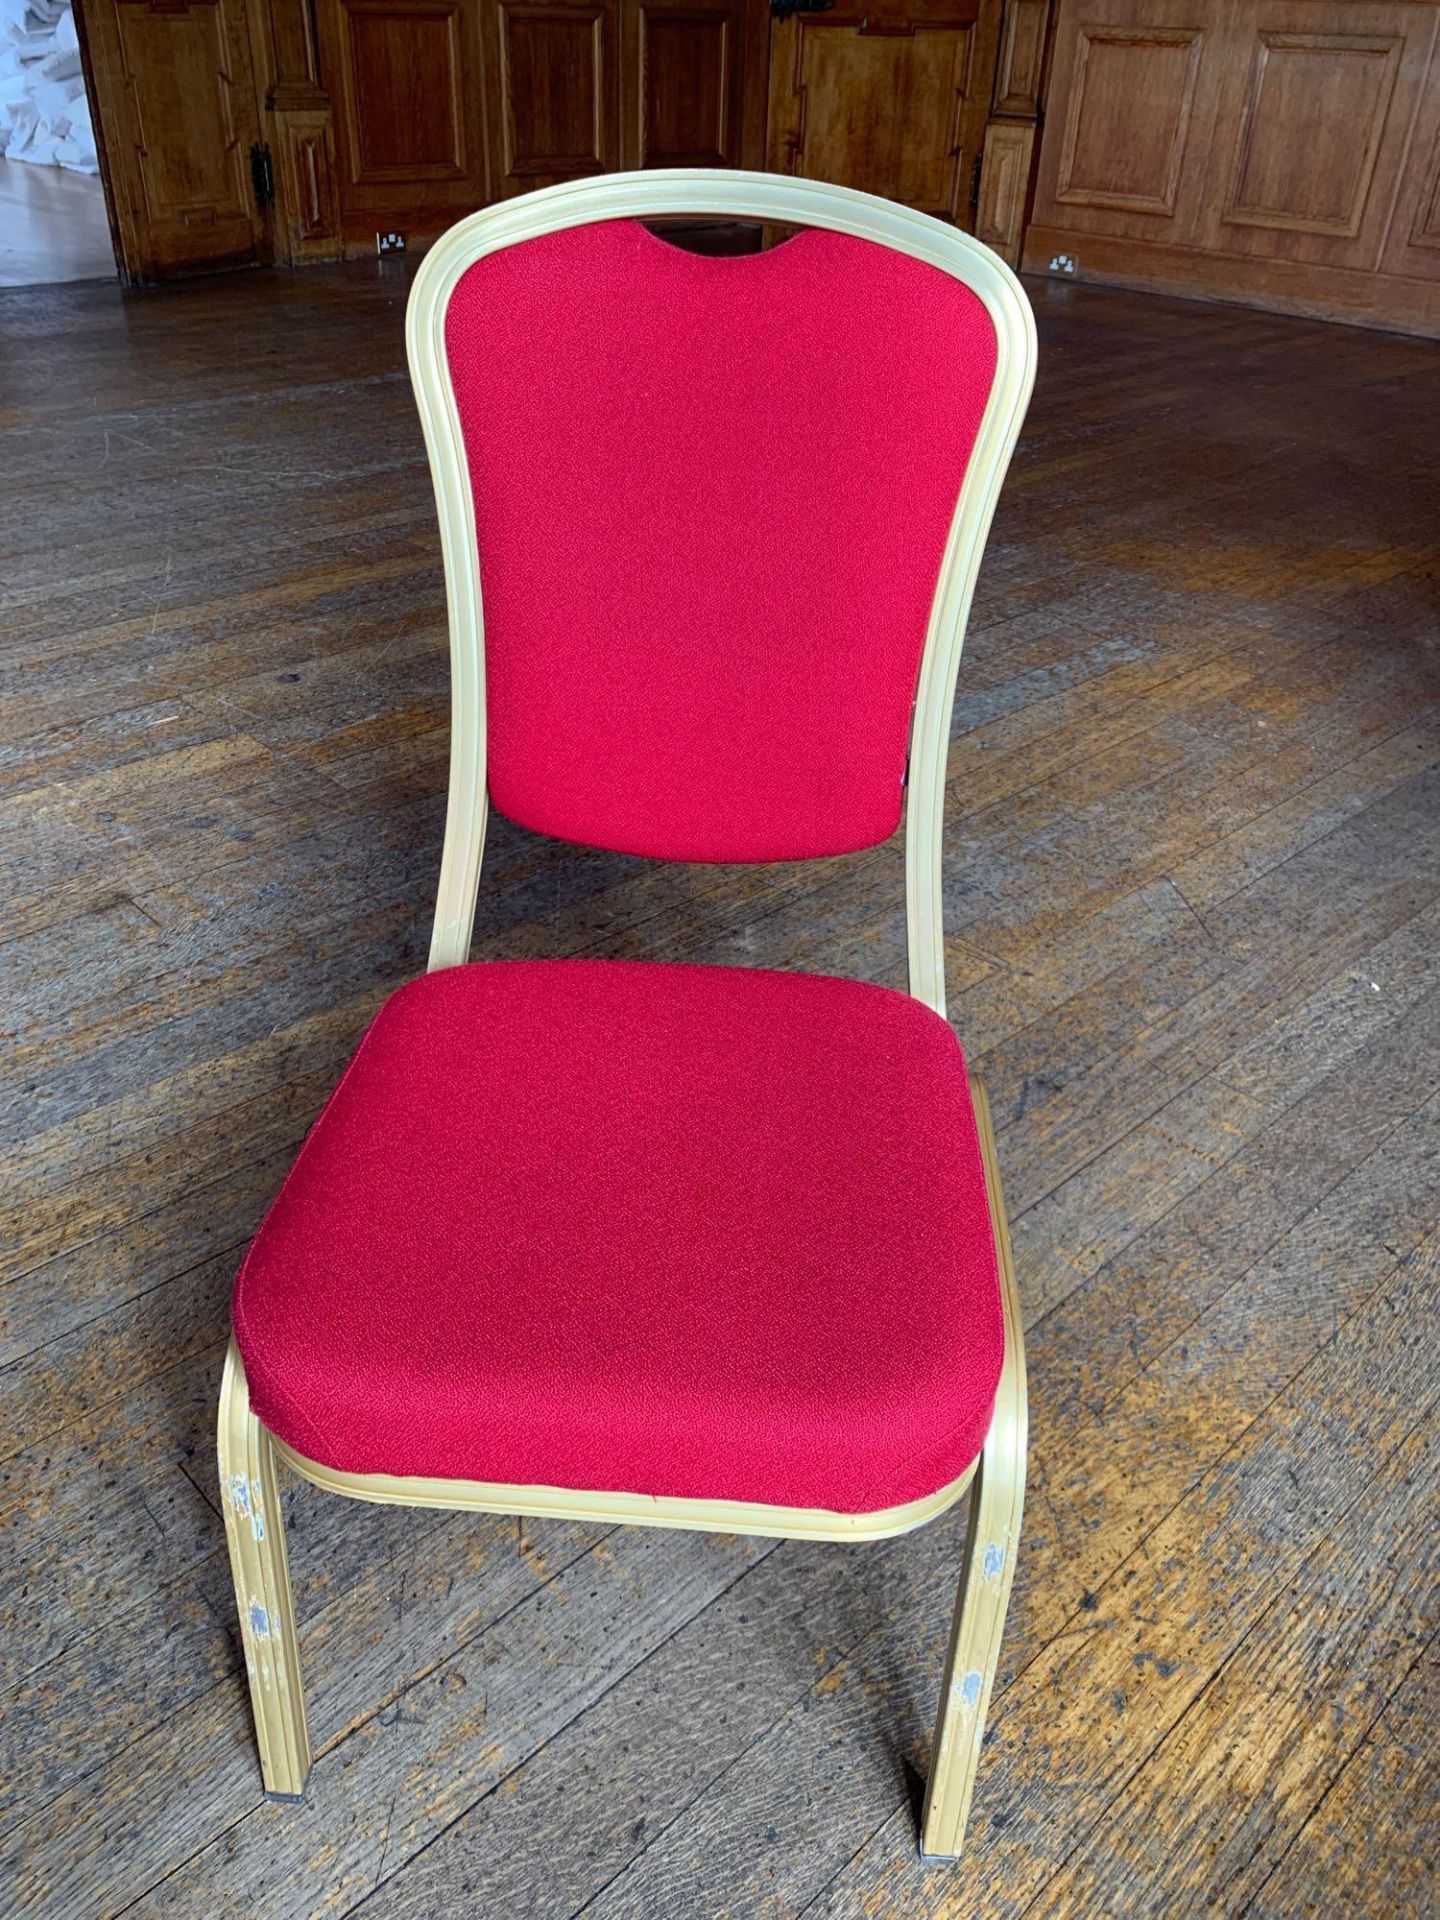 Burgess Furnitures Furniture CH569 Stacking Banquet Chair Red And Gold x 10 45 x 43 x 99cm - Image 2 of 2